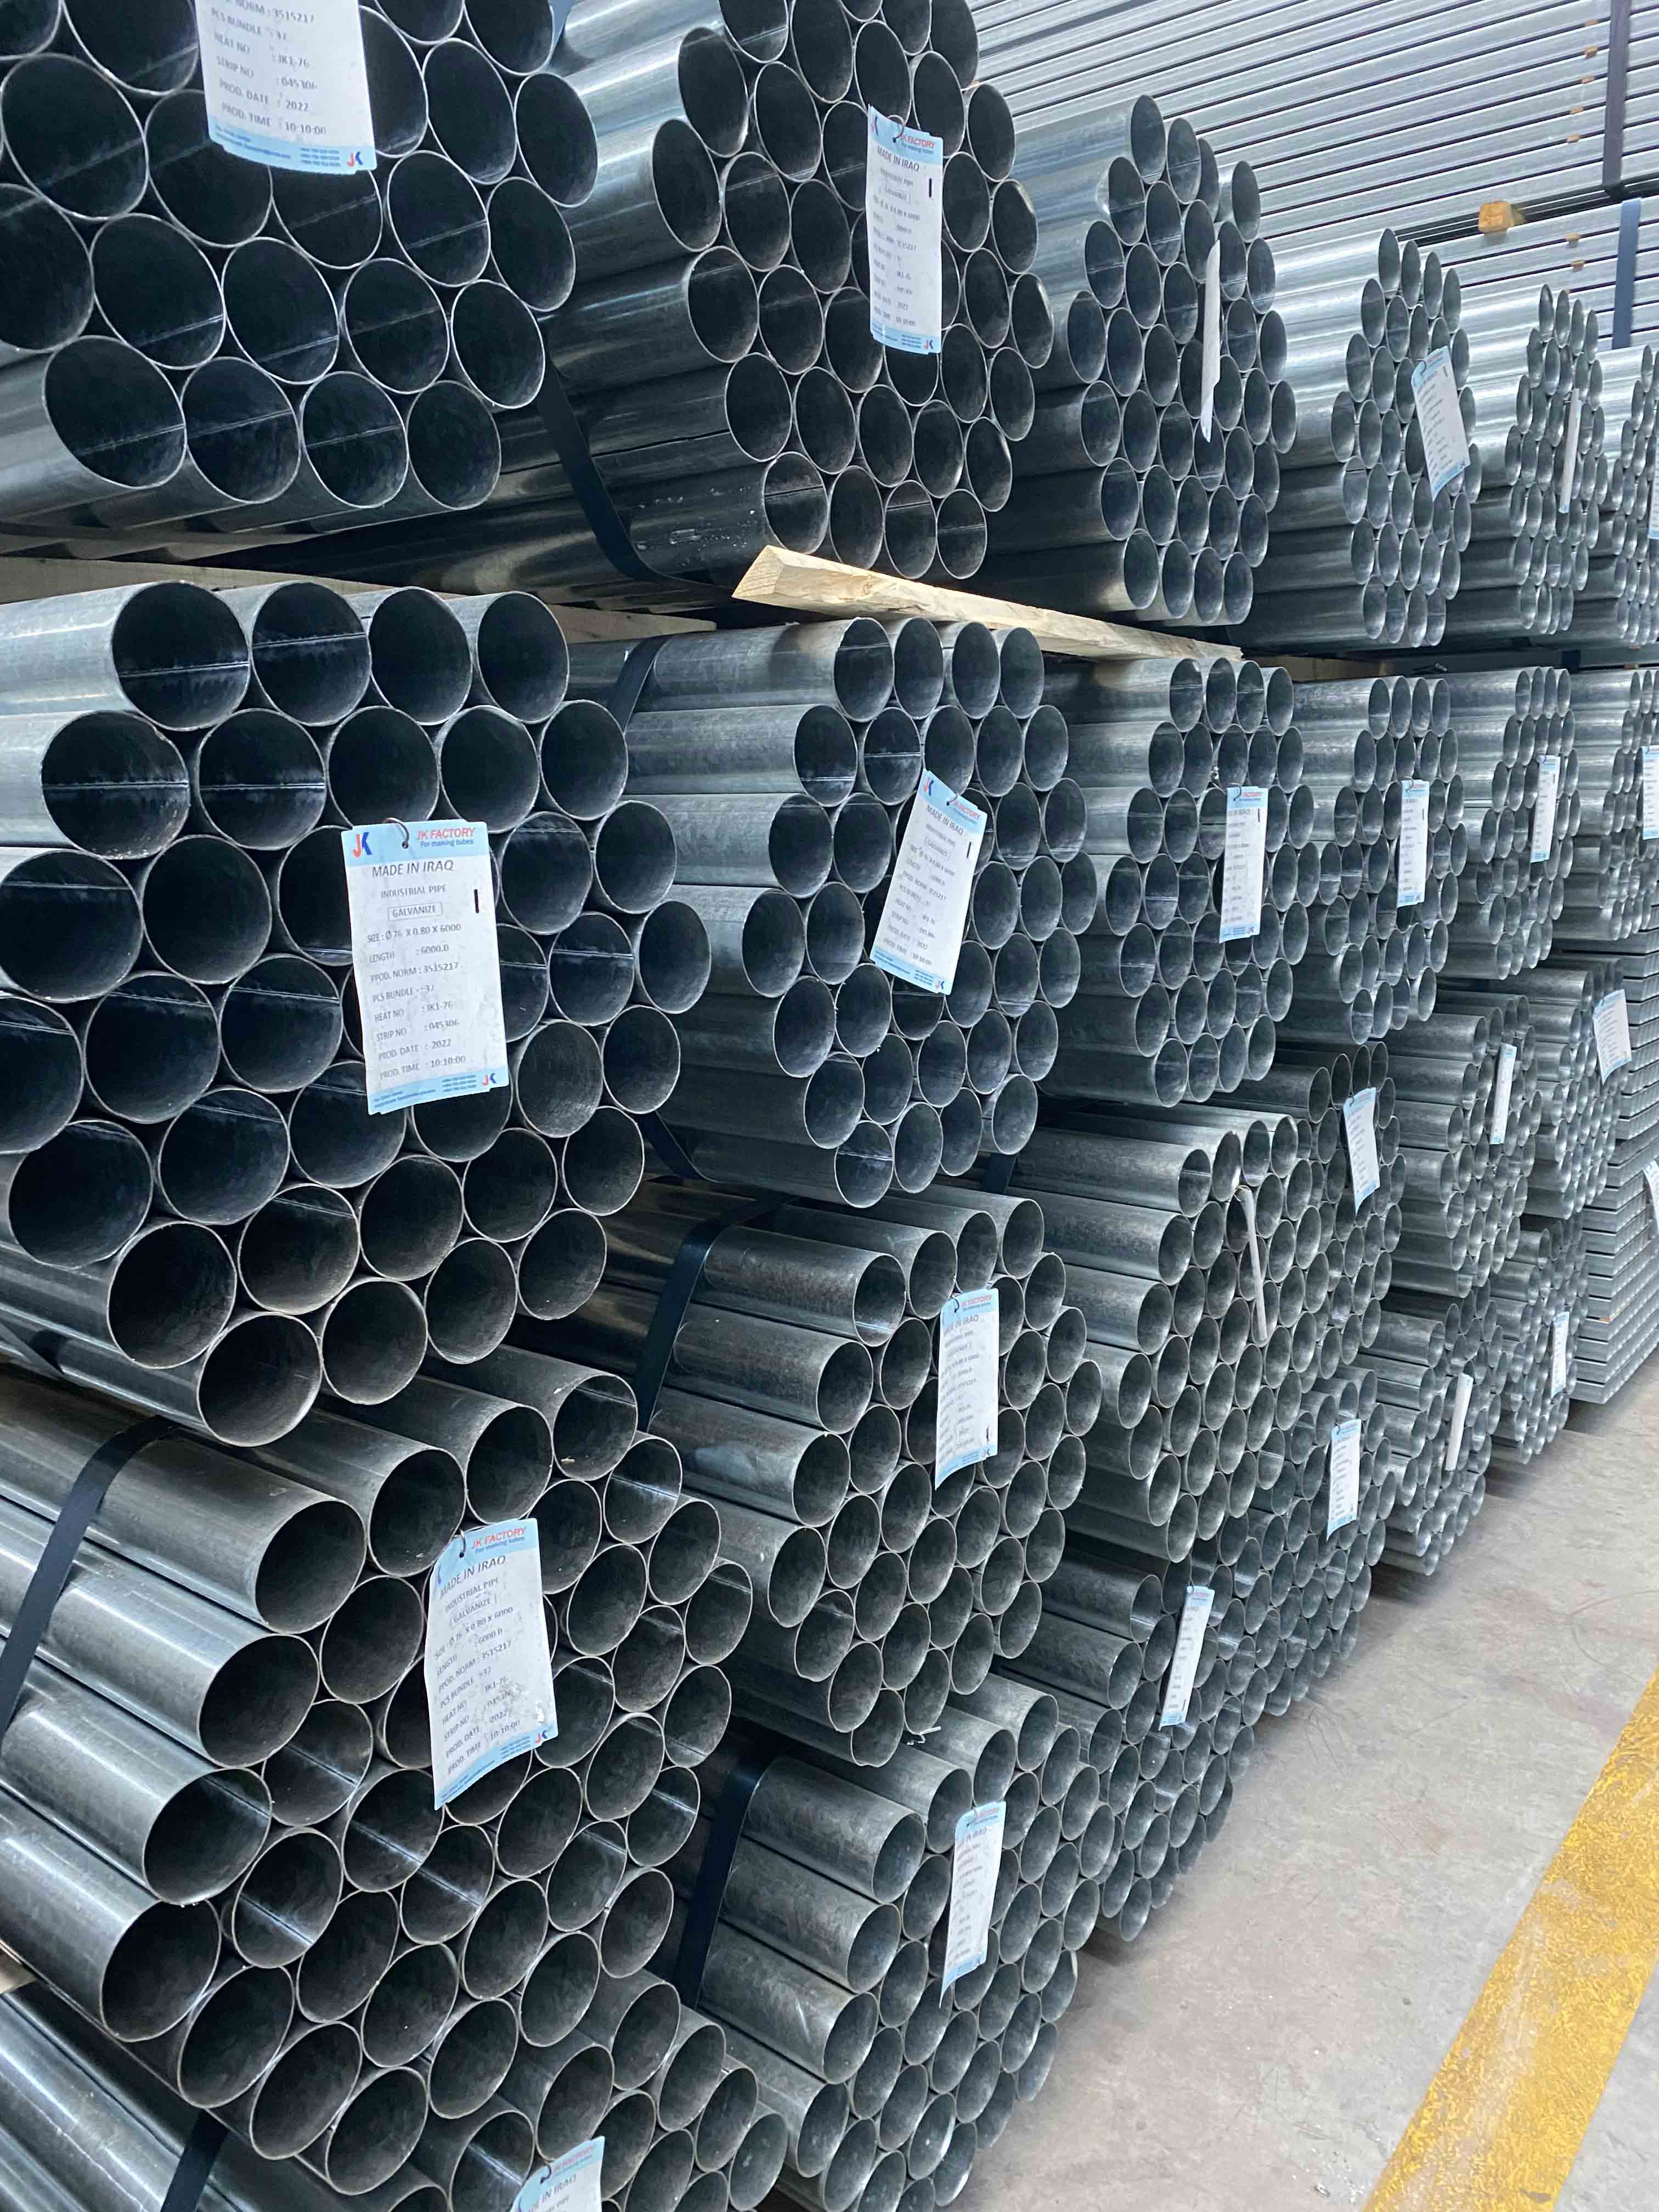 INDUSTRIAL HOT & GALVANIZED PIPES Image